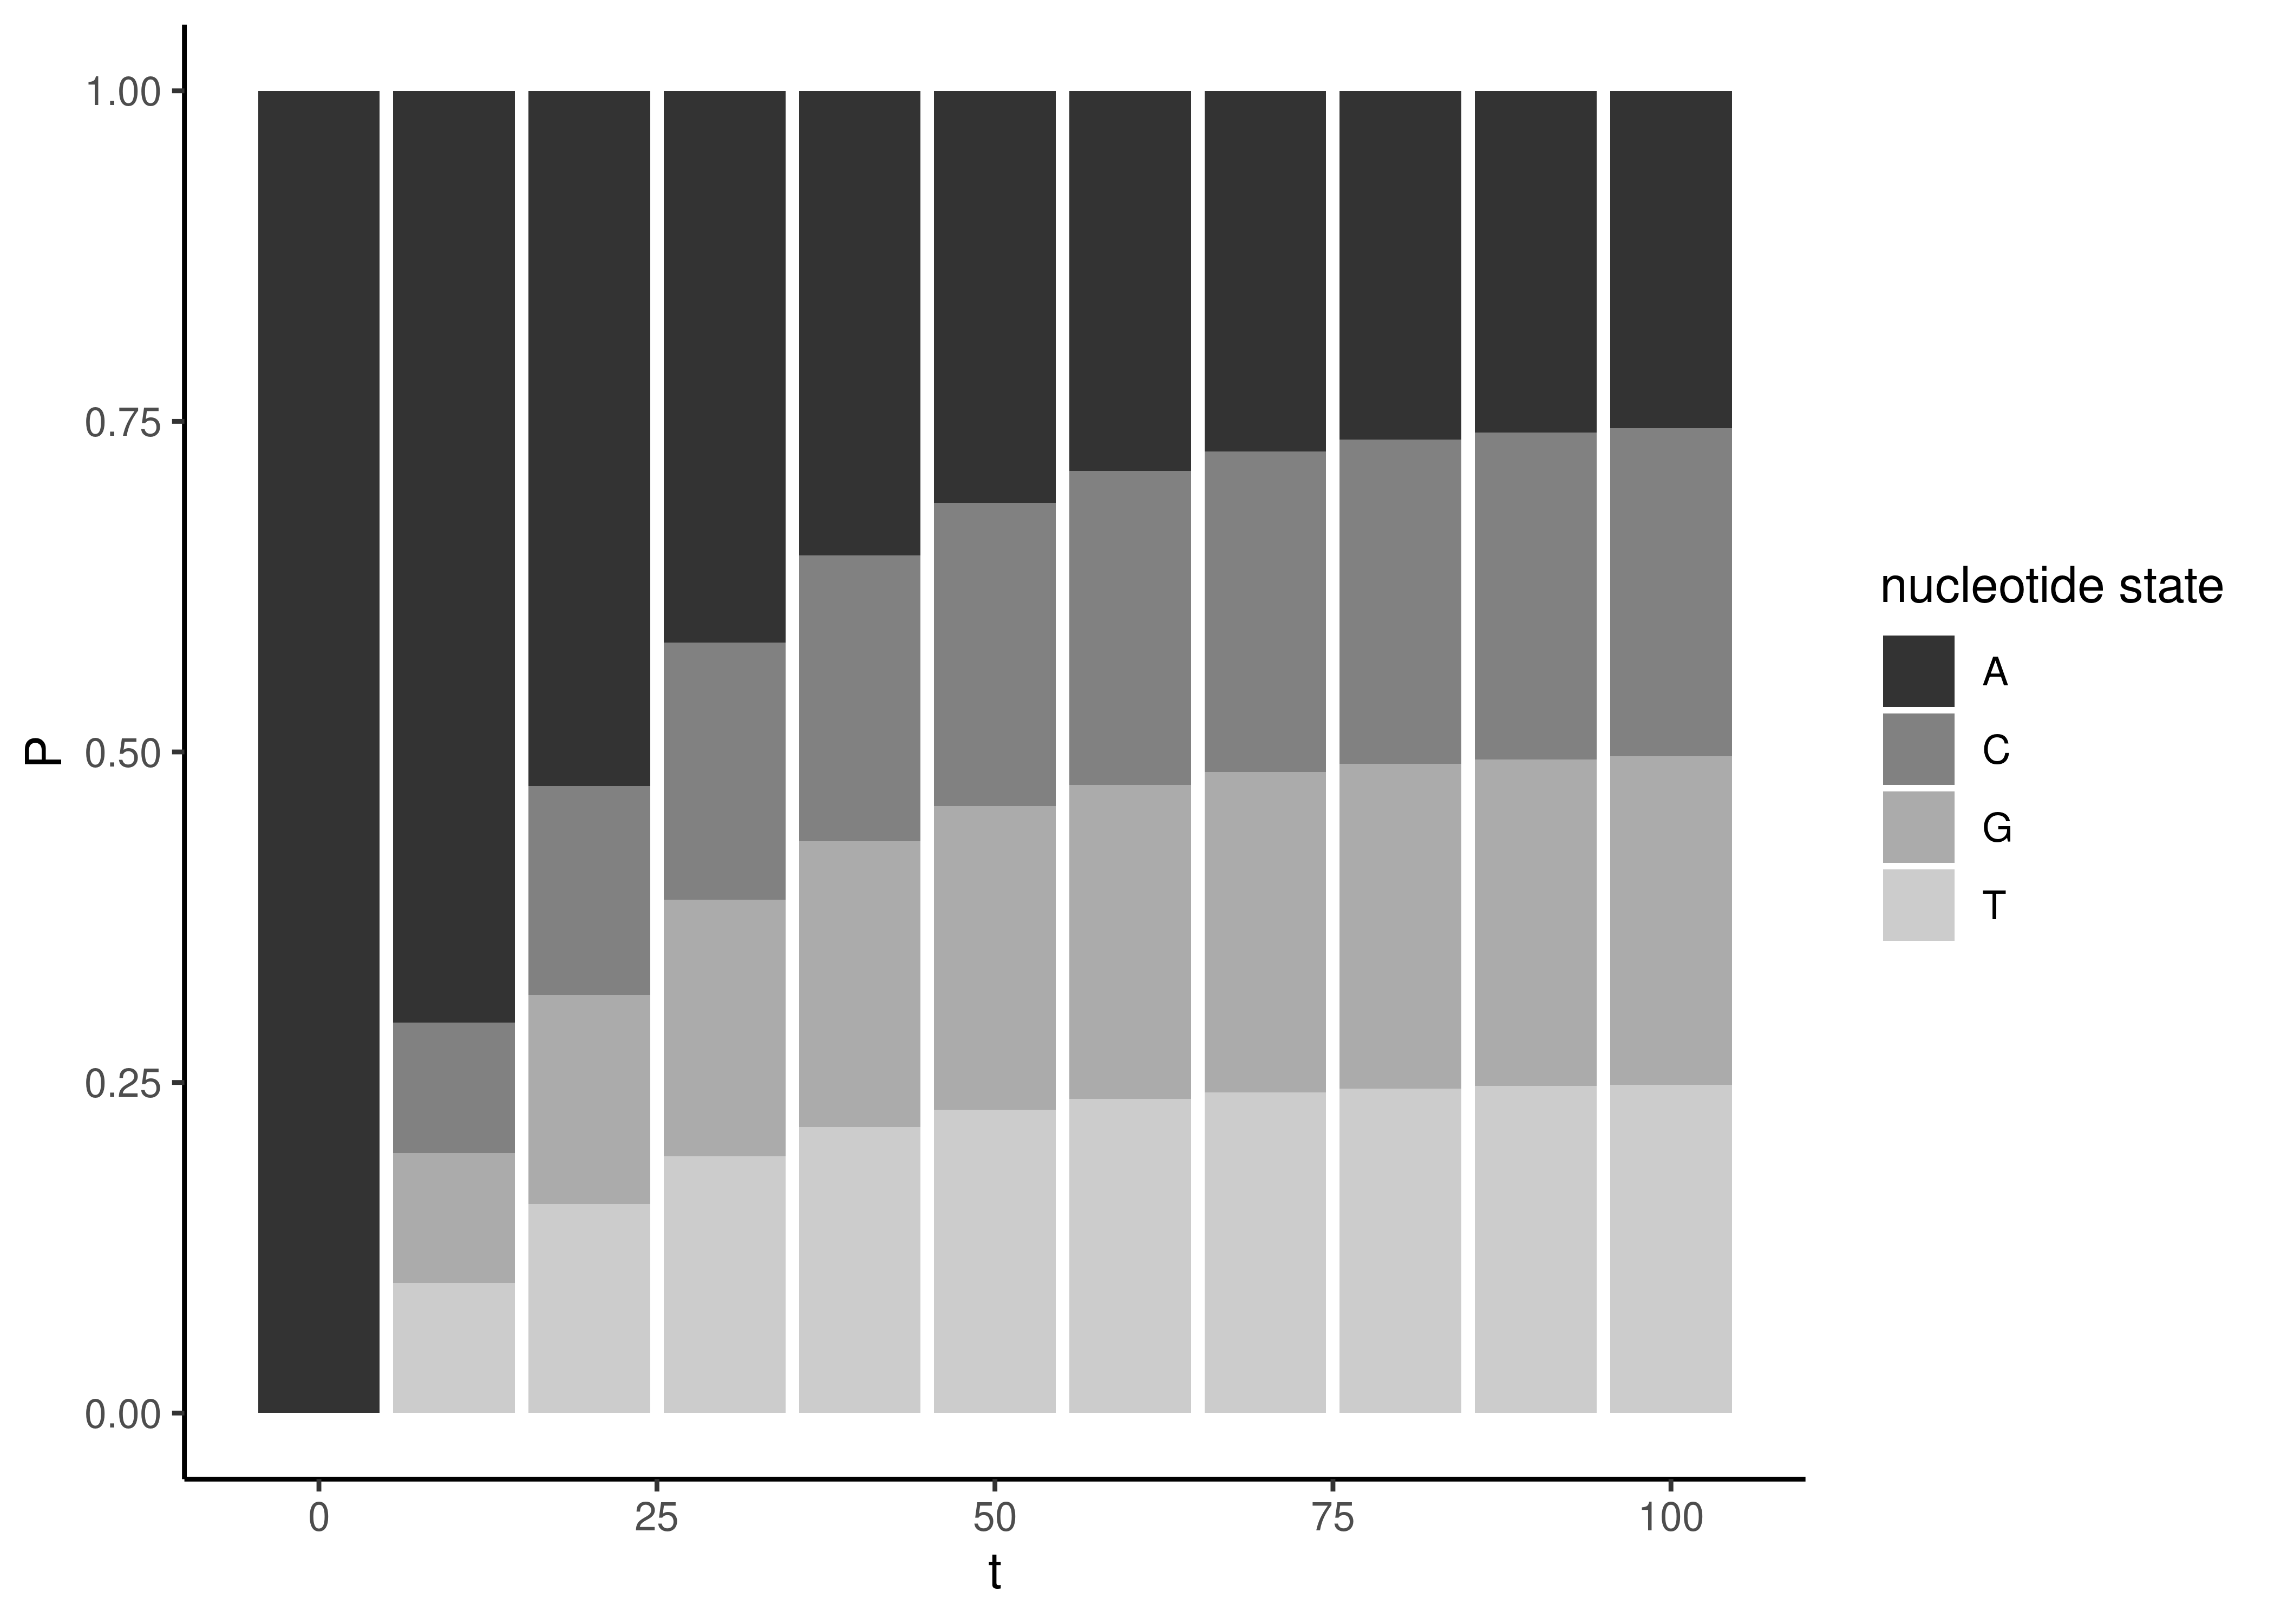 Stacked bar plots indicating the frequency of each nucleotide after evolution for a specified amount of time. The rate of evolution is $\mu=0.050$. The starting state is set at A, so the probability of observing an A is described by Equation \@ref(eq:sim-stay). The other three nucleotides, C, G, and T, are described by Equation \@ref(eq:sim-change). At time $t=0$ (no evolution), the probability that the state is the same as at the start is 1.0. As the length of time increases, the four nucleotides converge on equal probability of 0.25 each.